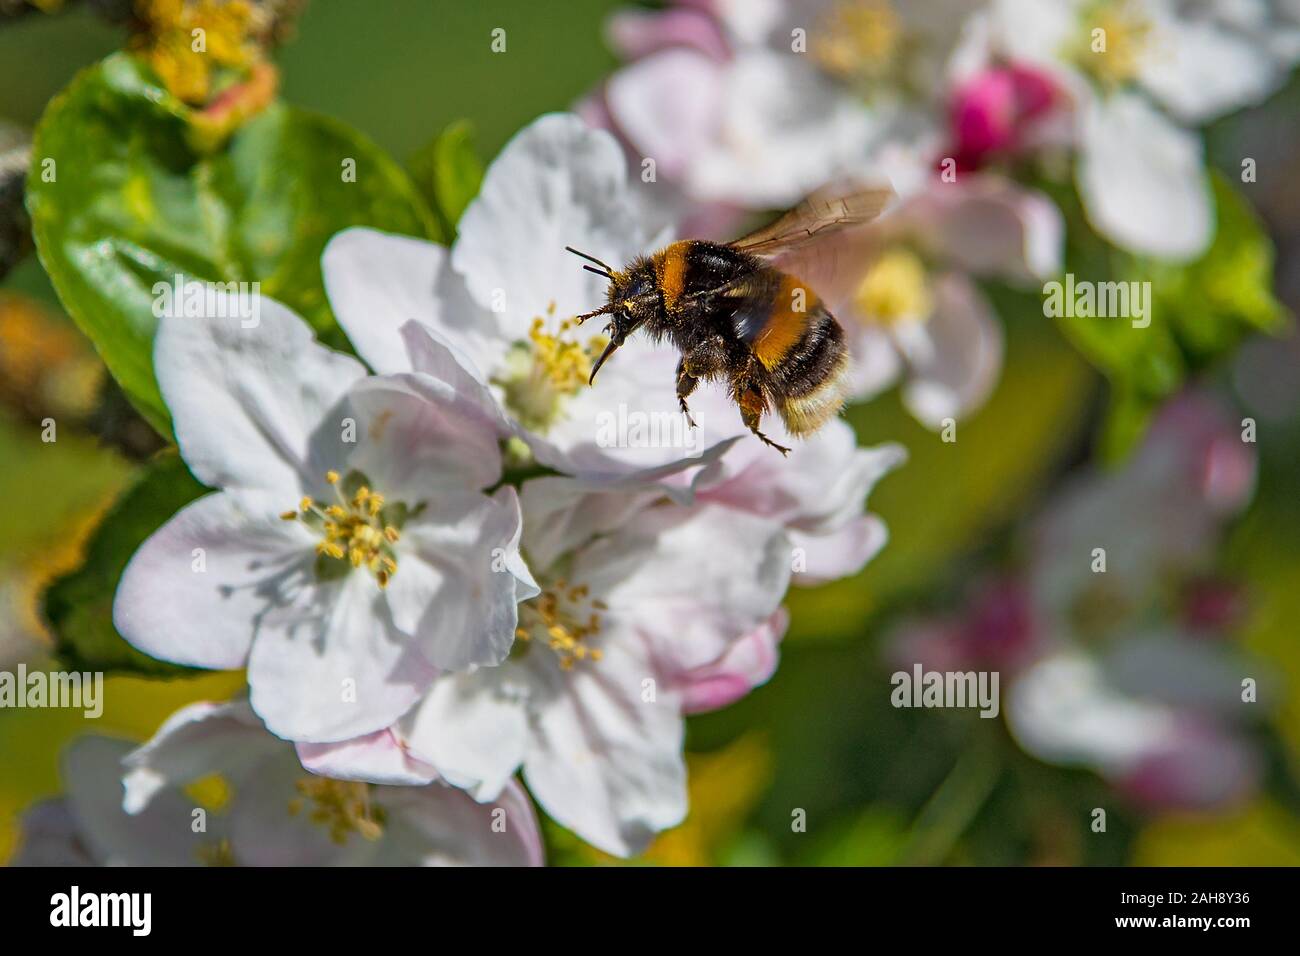 Buff-tailed bumble bee (Bombus terrestris) on blossom of blooming apple tree (Malus domestica), Hesse, Germany Stock Photo